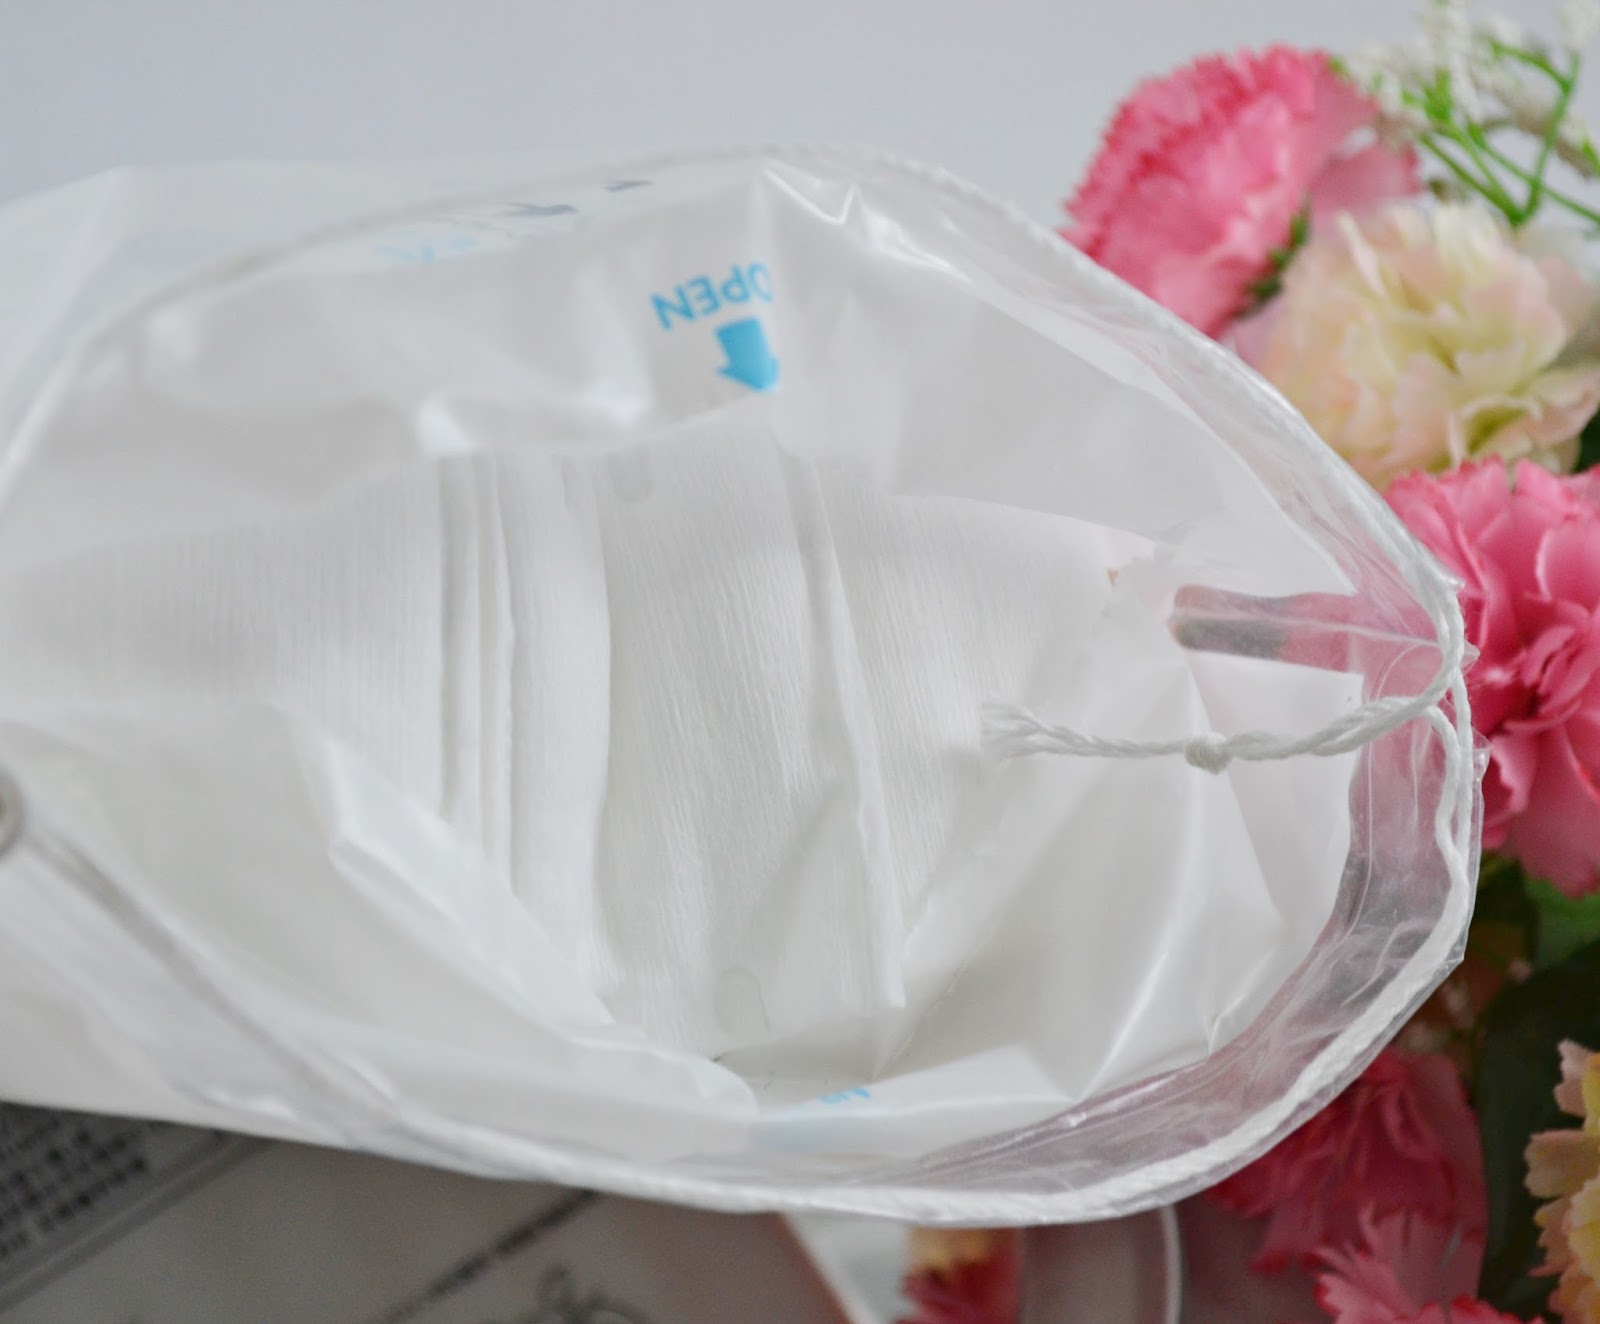 Miniso: Double-Sided Cosmetic Cotton | All About Beauty 101